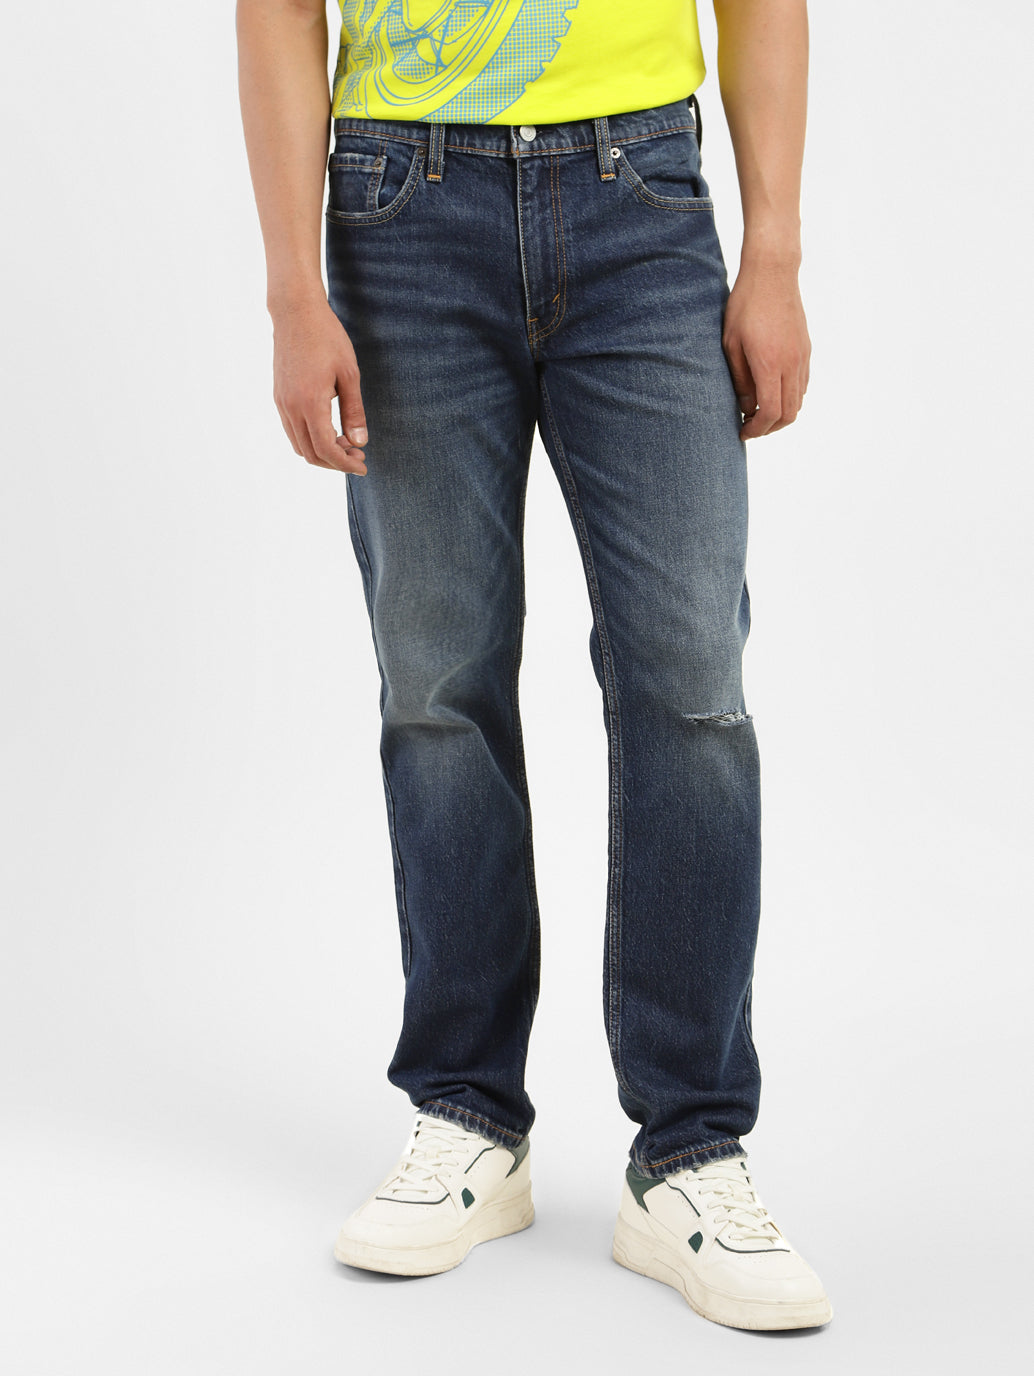 Men's Joggers Jeans, Blue at Rs 295/piece in Bengaluru